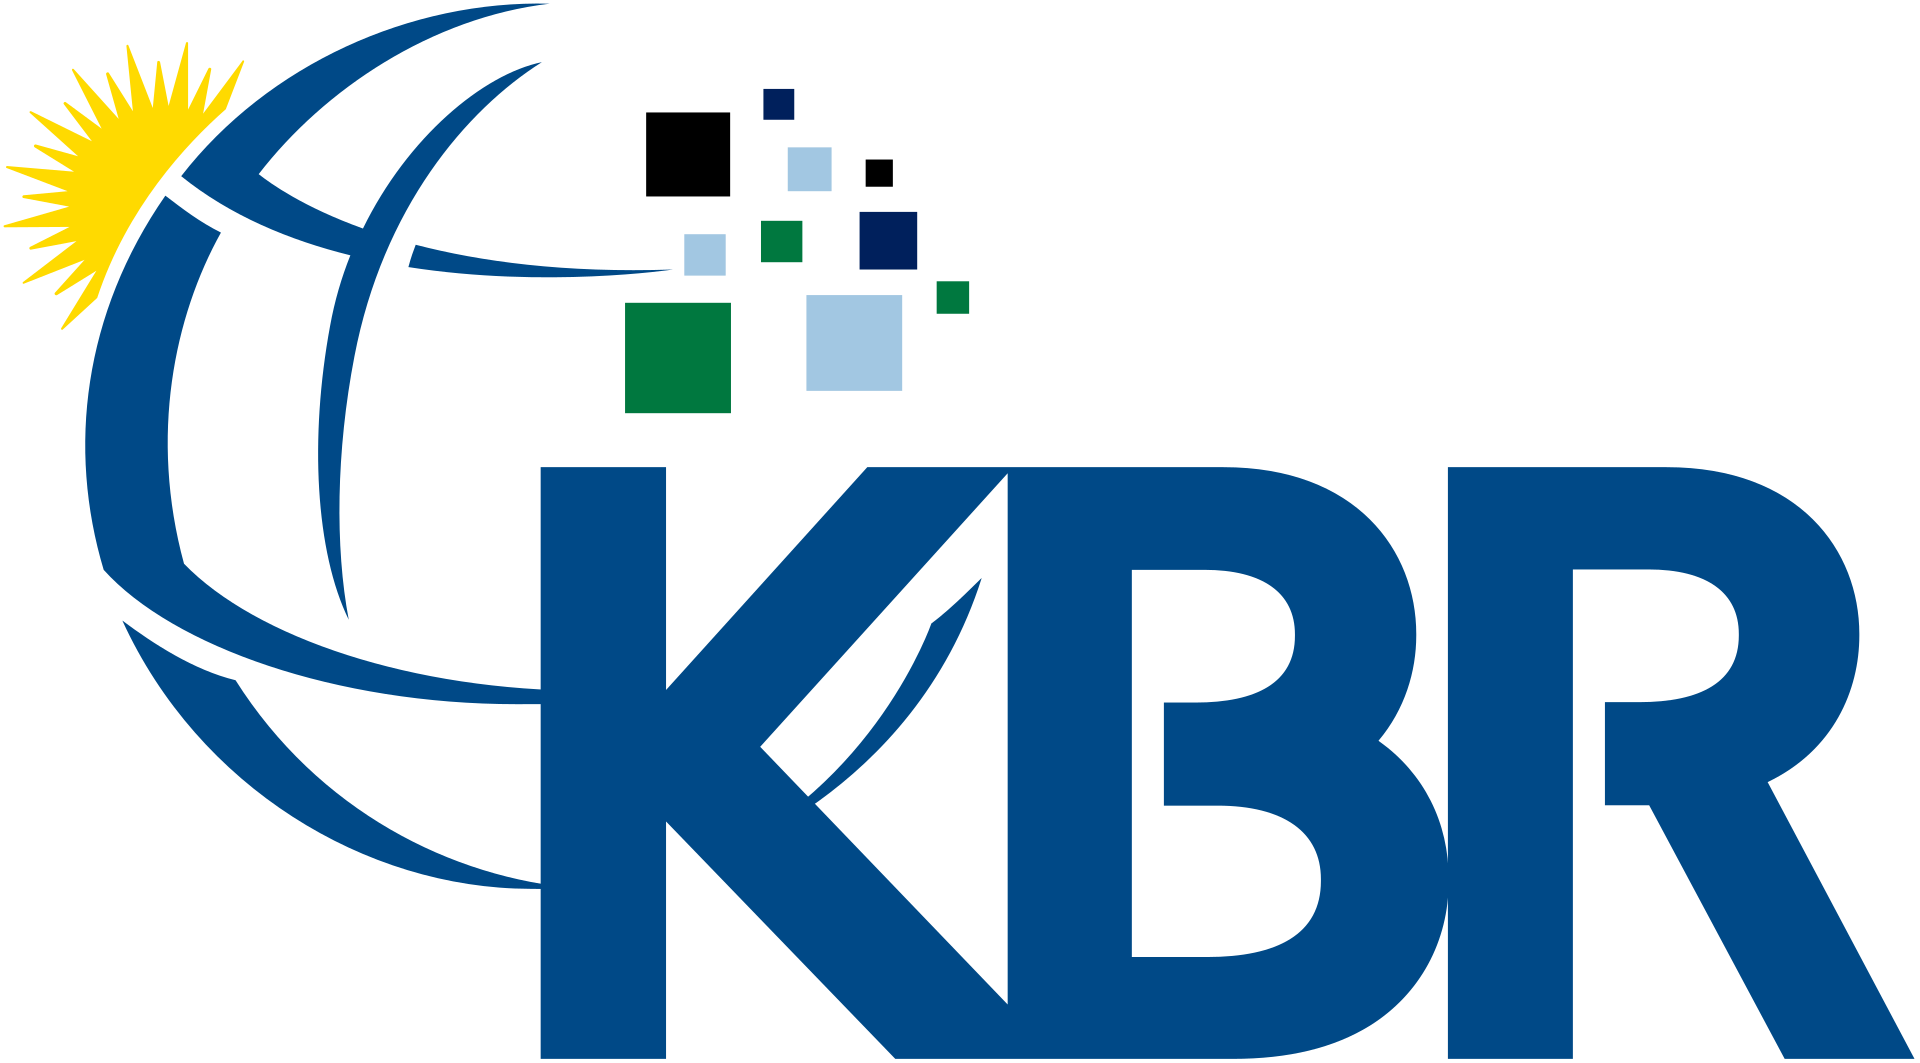 KBR, Inc. logo, By Source (WP:NFCC#4), Fair use, http://en.wikipedia.org/w/index.php?curid=61420148"